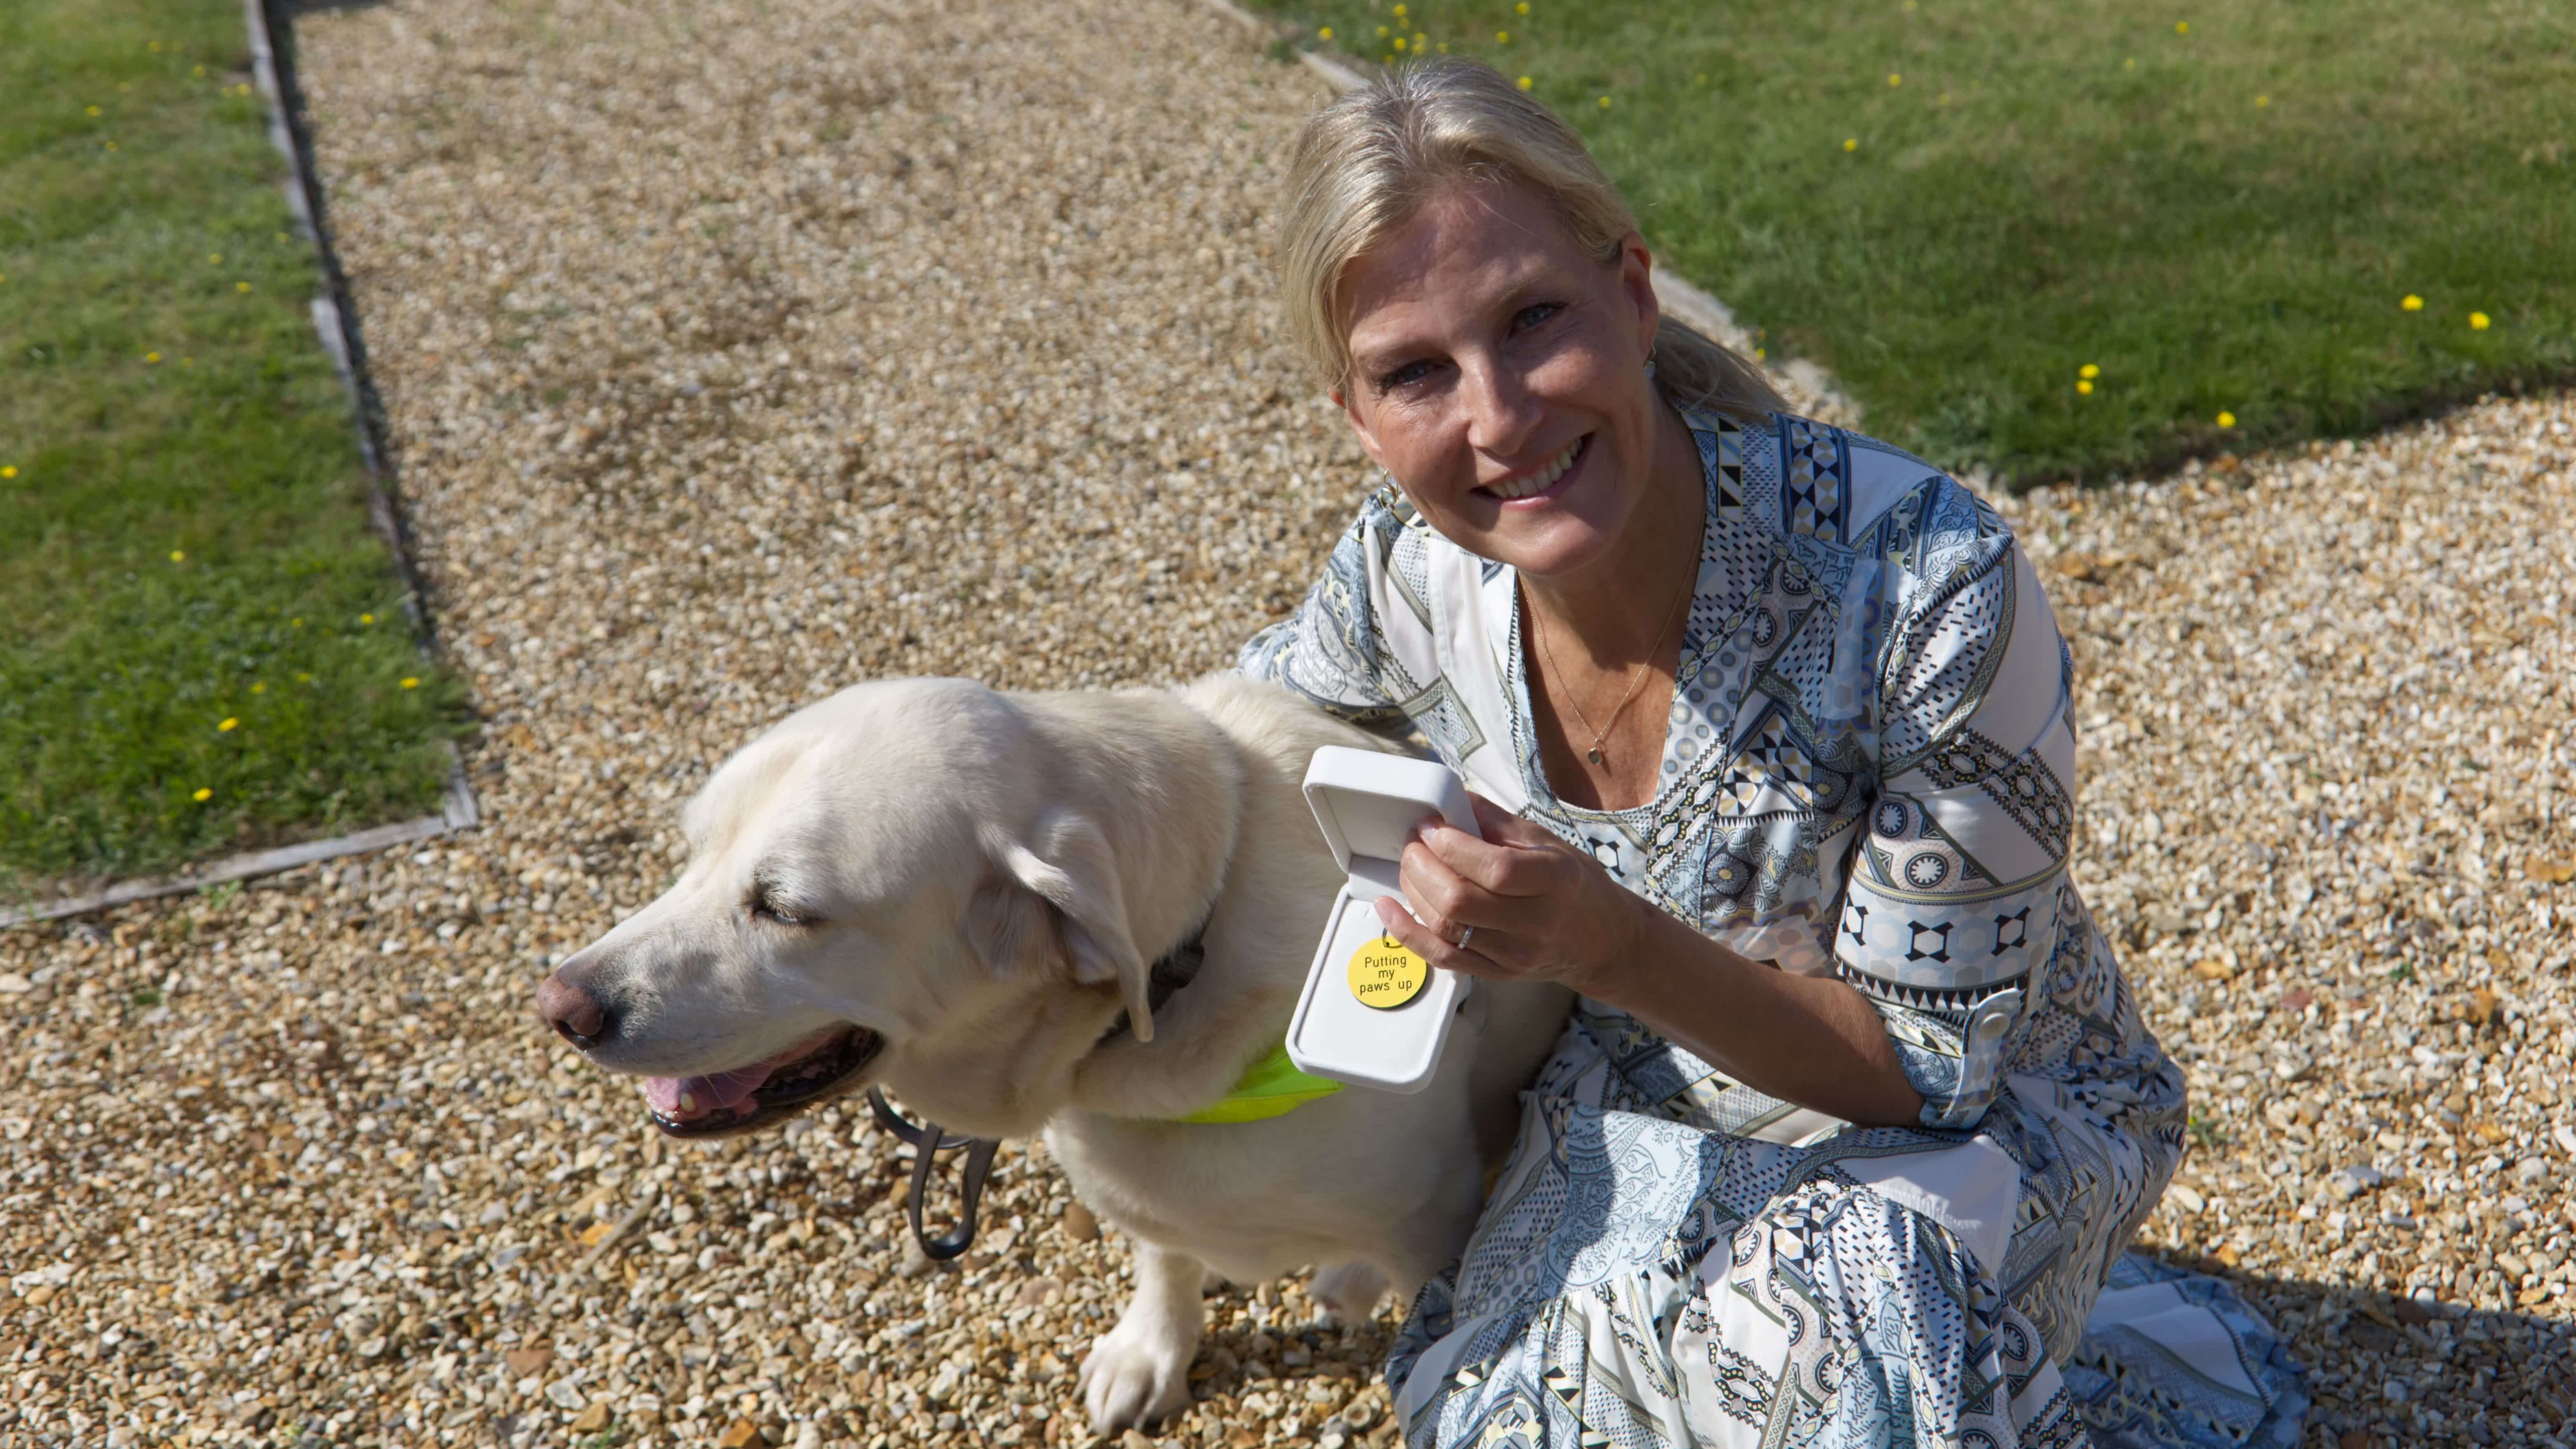 HRH The Duchess of Edinburgh crouches next to retiring guide dog Piper, a yellow Labrador cross golden retriever, while holding a yellow dog tag with the inscription 'Putting my paws up'